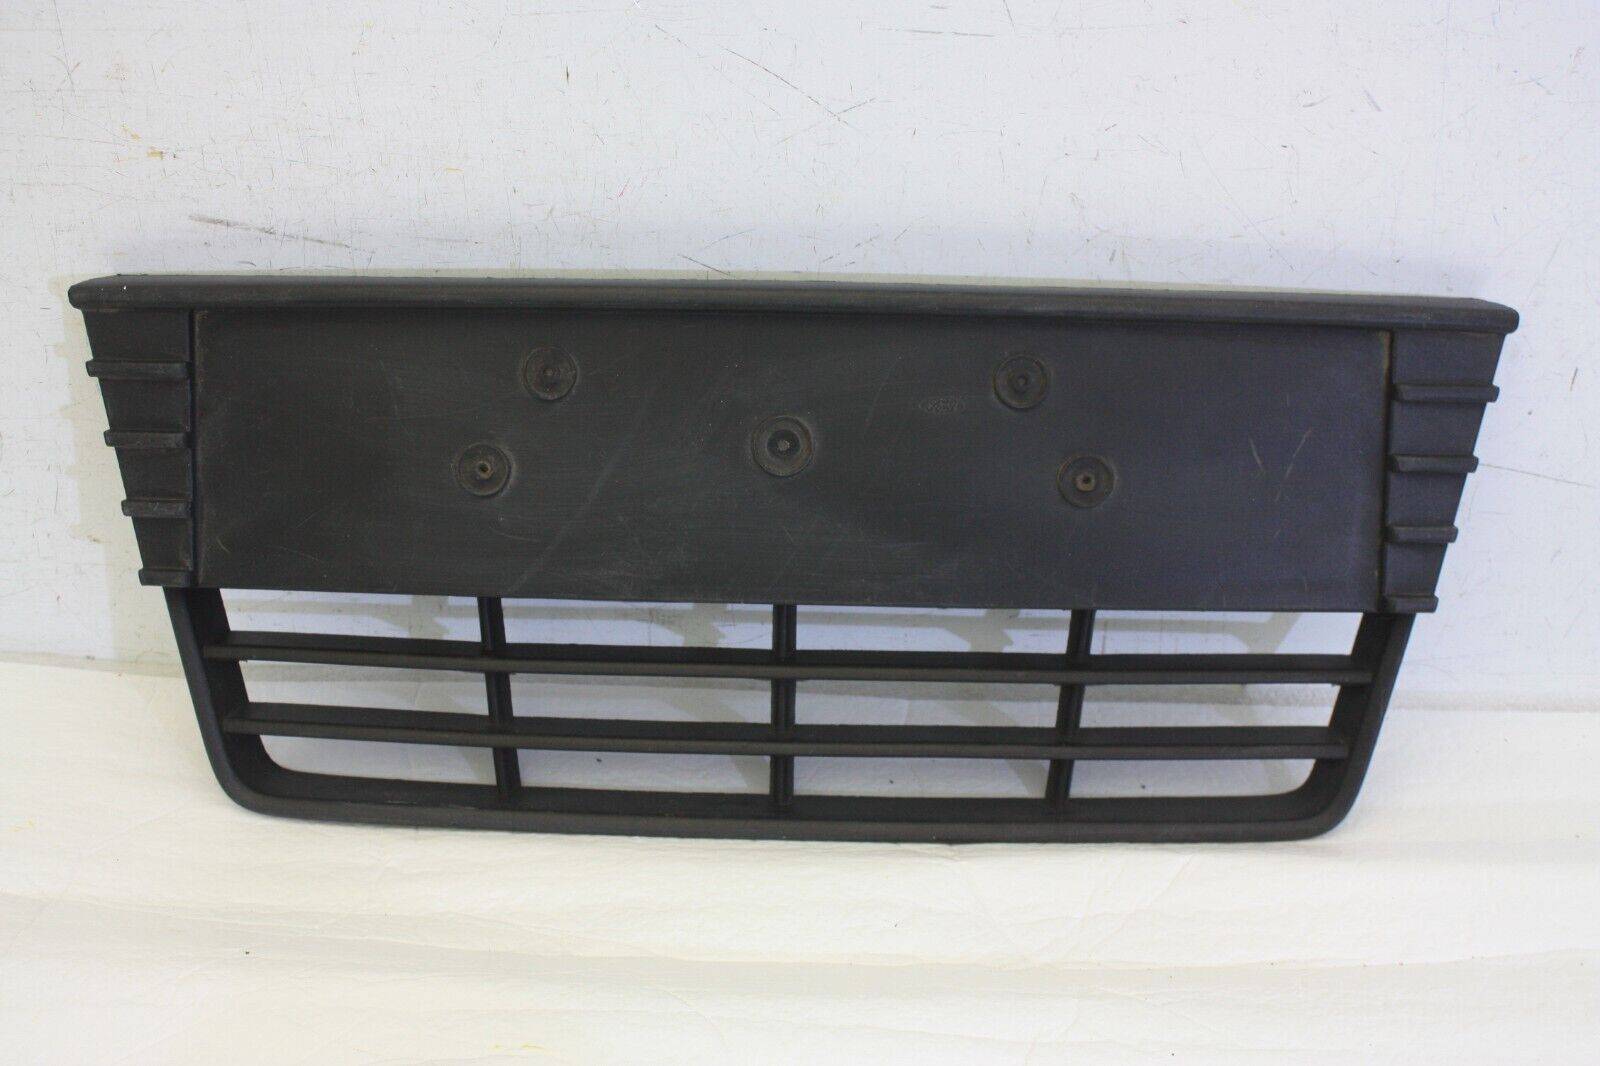 Ford-Focus-Front-Bumper-Grill-2011-TO-2014-BM51-17K945-A-Genuine-176247746081